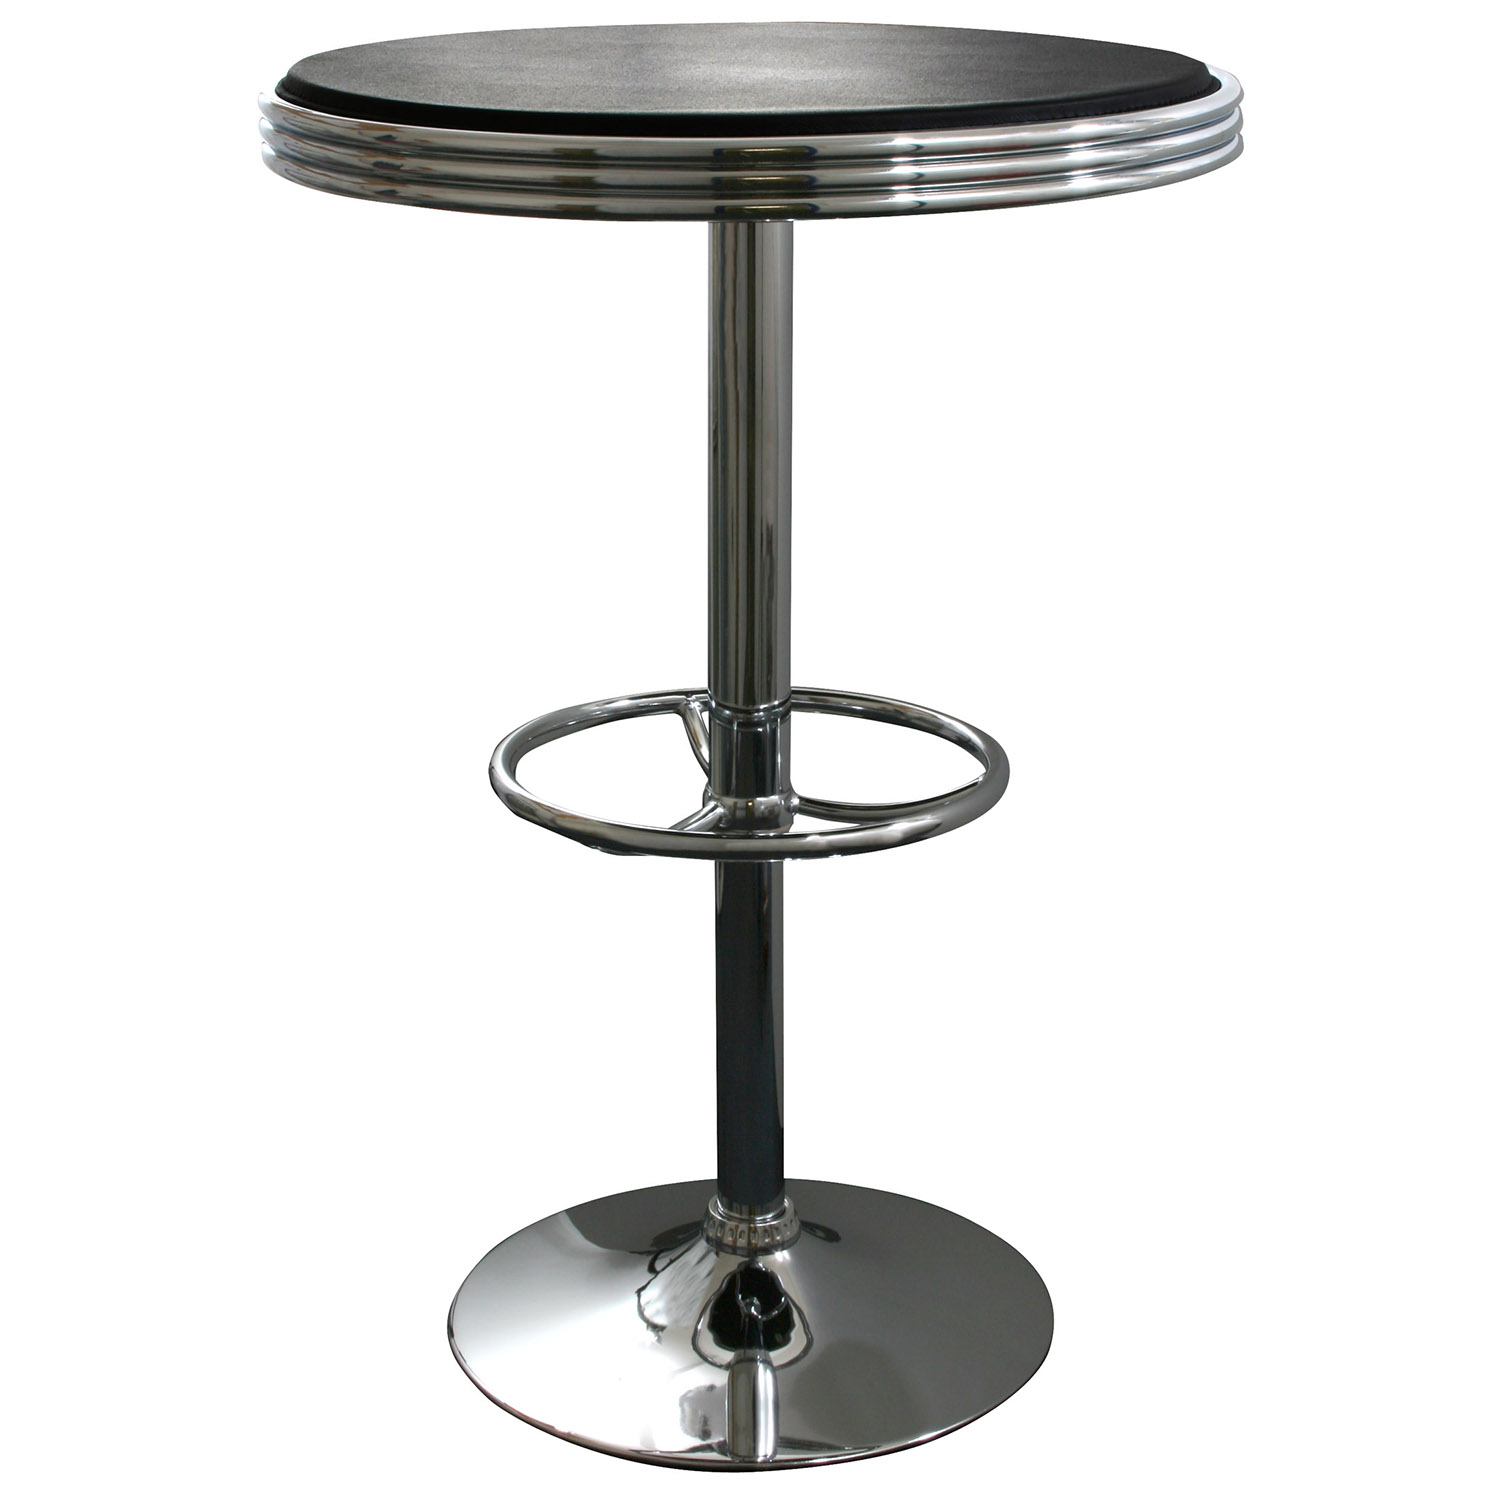 SFTABLE with swivel table top.